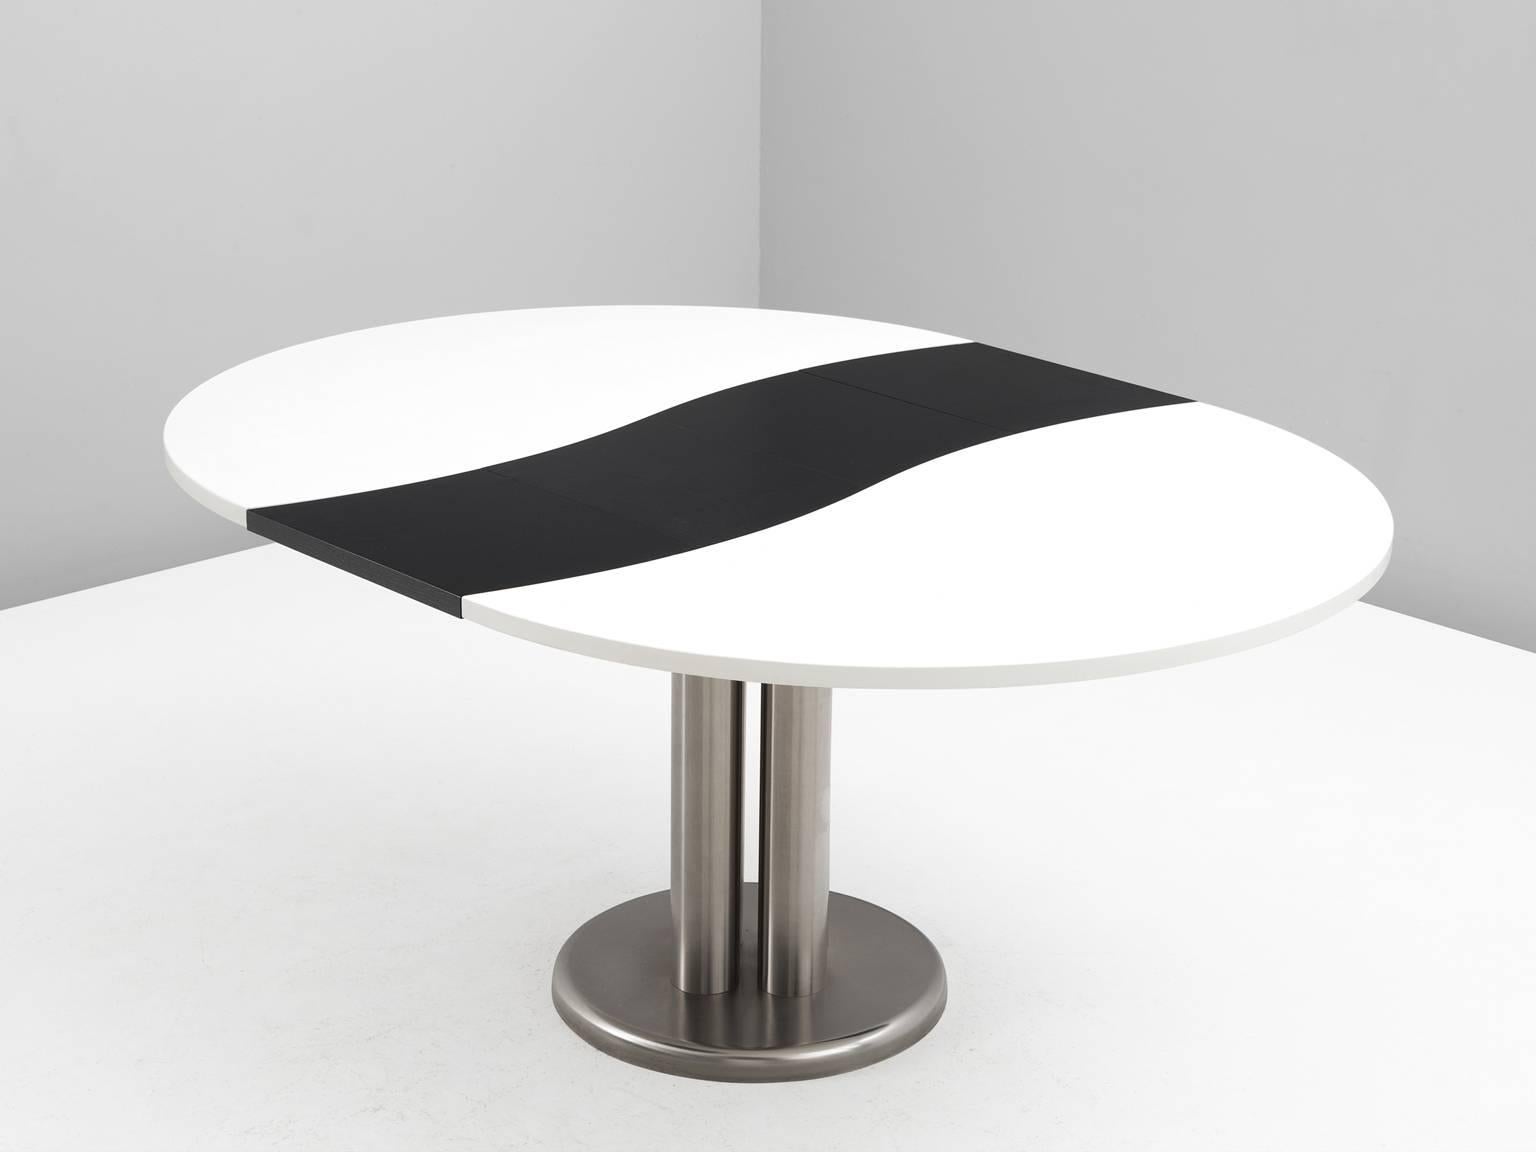 Extendable table, in stainless steel and wood, by Studio D'Urbino Lomazzi, Italy, 1969.

Oval dining table, with monochrome colored top. The top consist of a large white oval shape with a black wave in the center. The leg consist of four columns